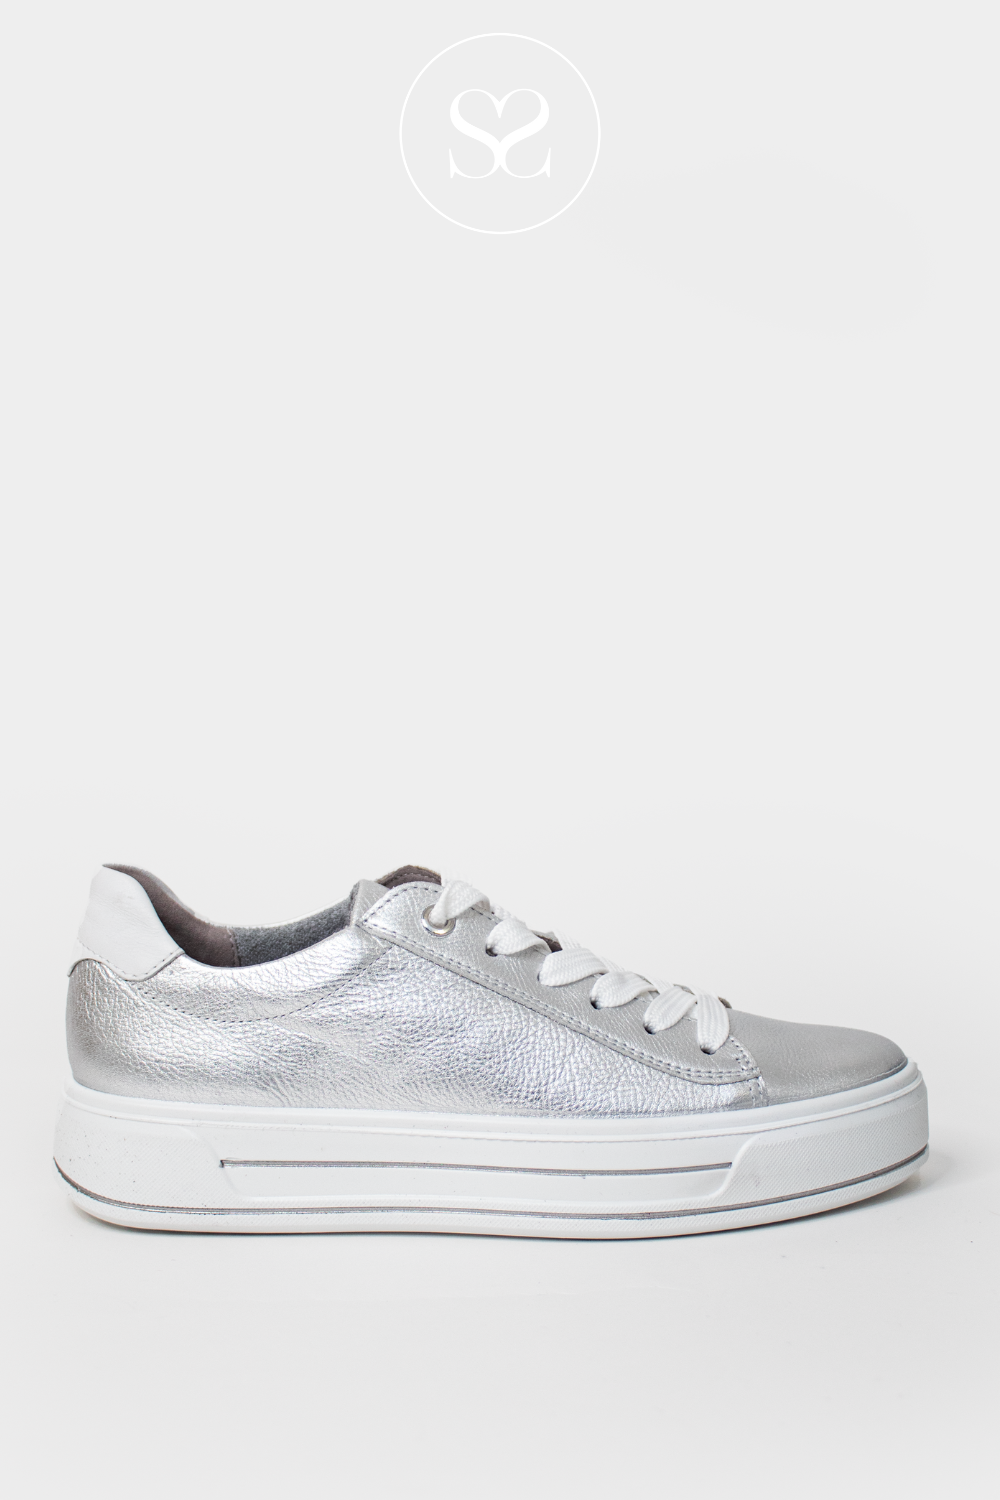 ARA 12-23003 SILVER FLATFORM TRAINERS WITH WHITE SOLE AND LACES